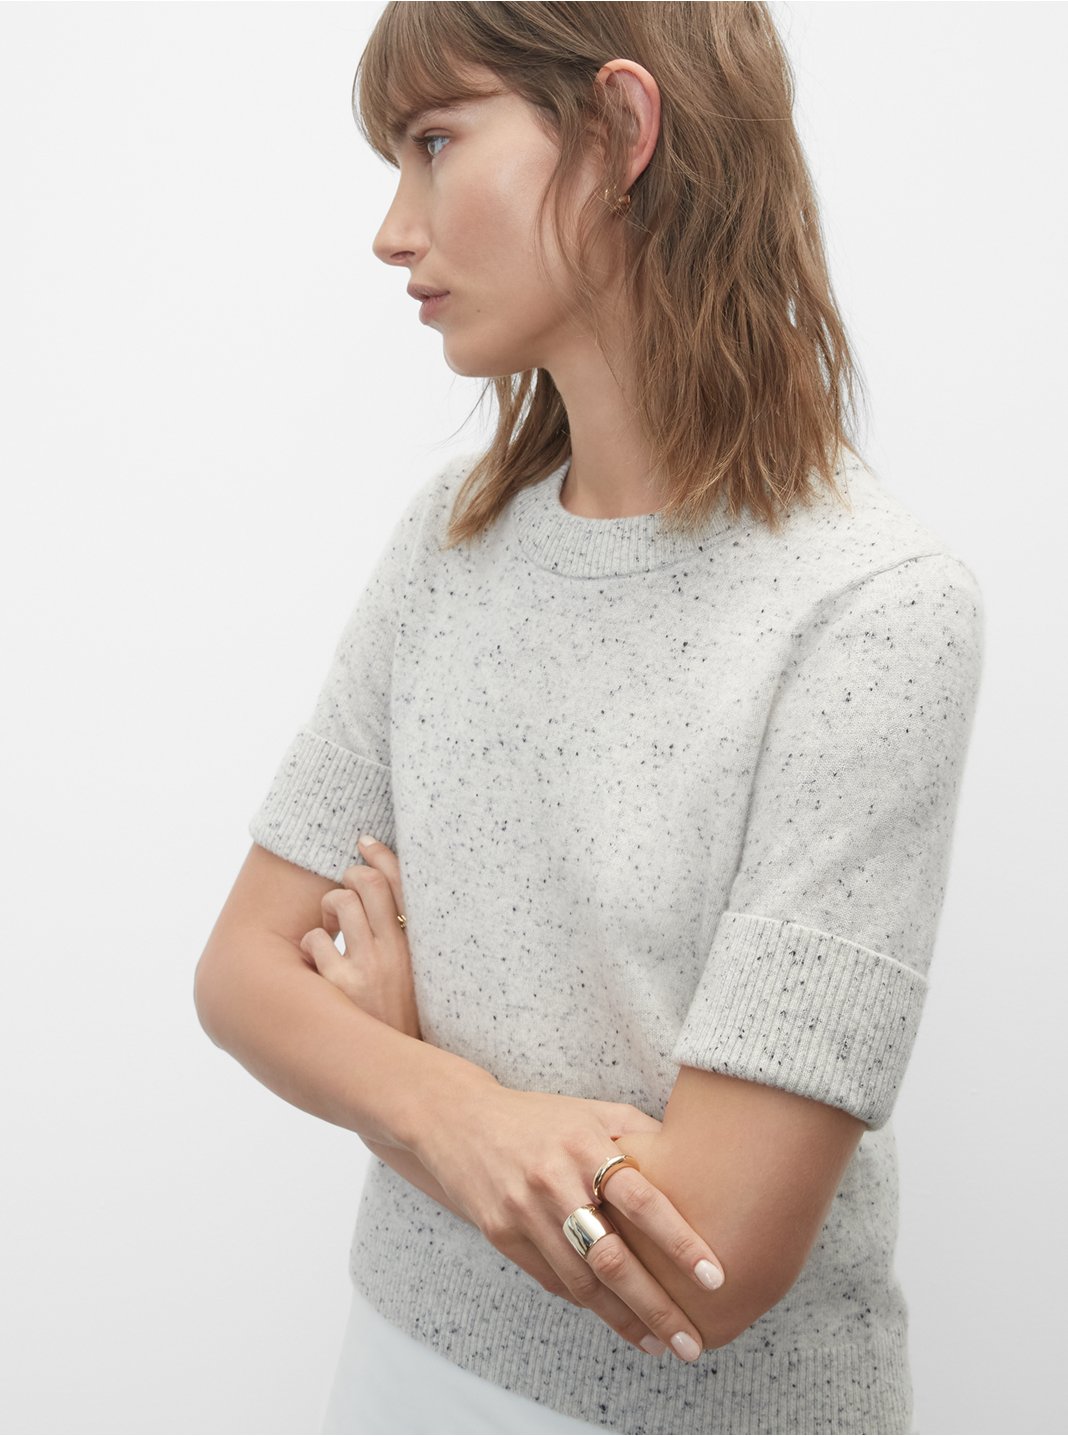 Clubmonaco Donegal Cashmere Short Sleeve Sweater